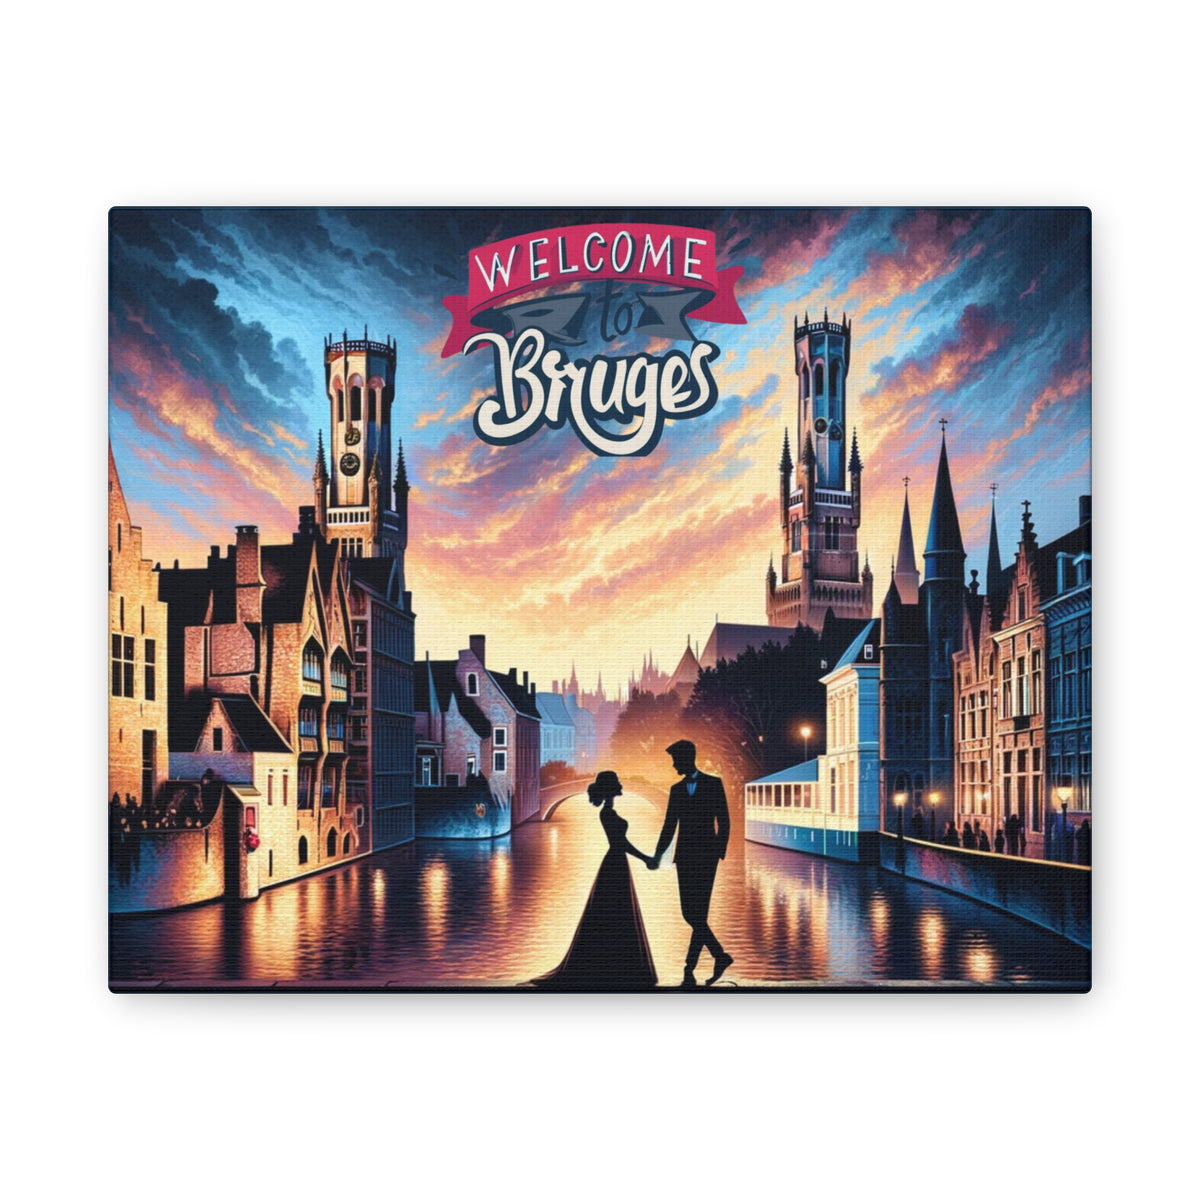 Welcome to Bruges - Romantic Wall Art